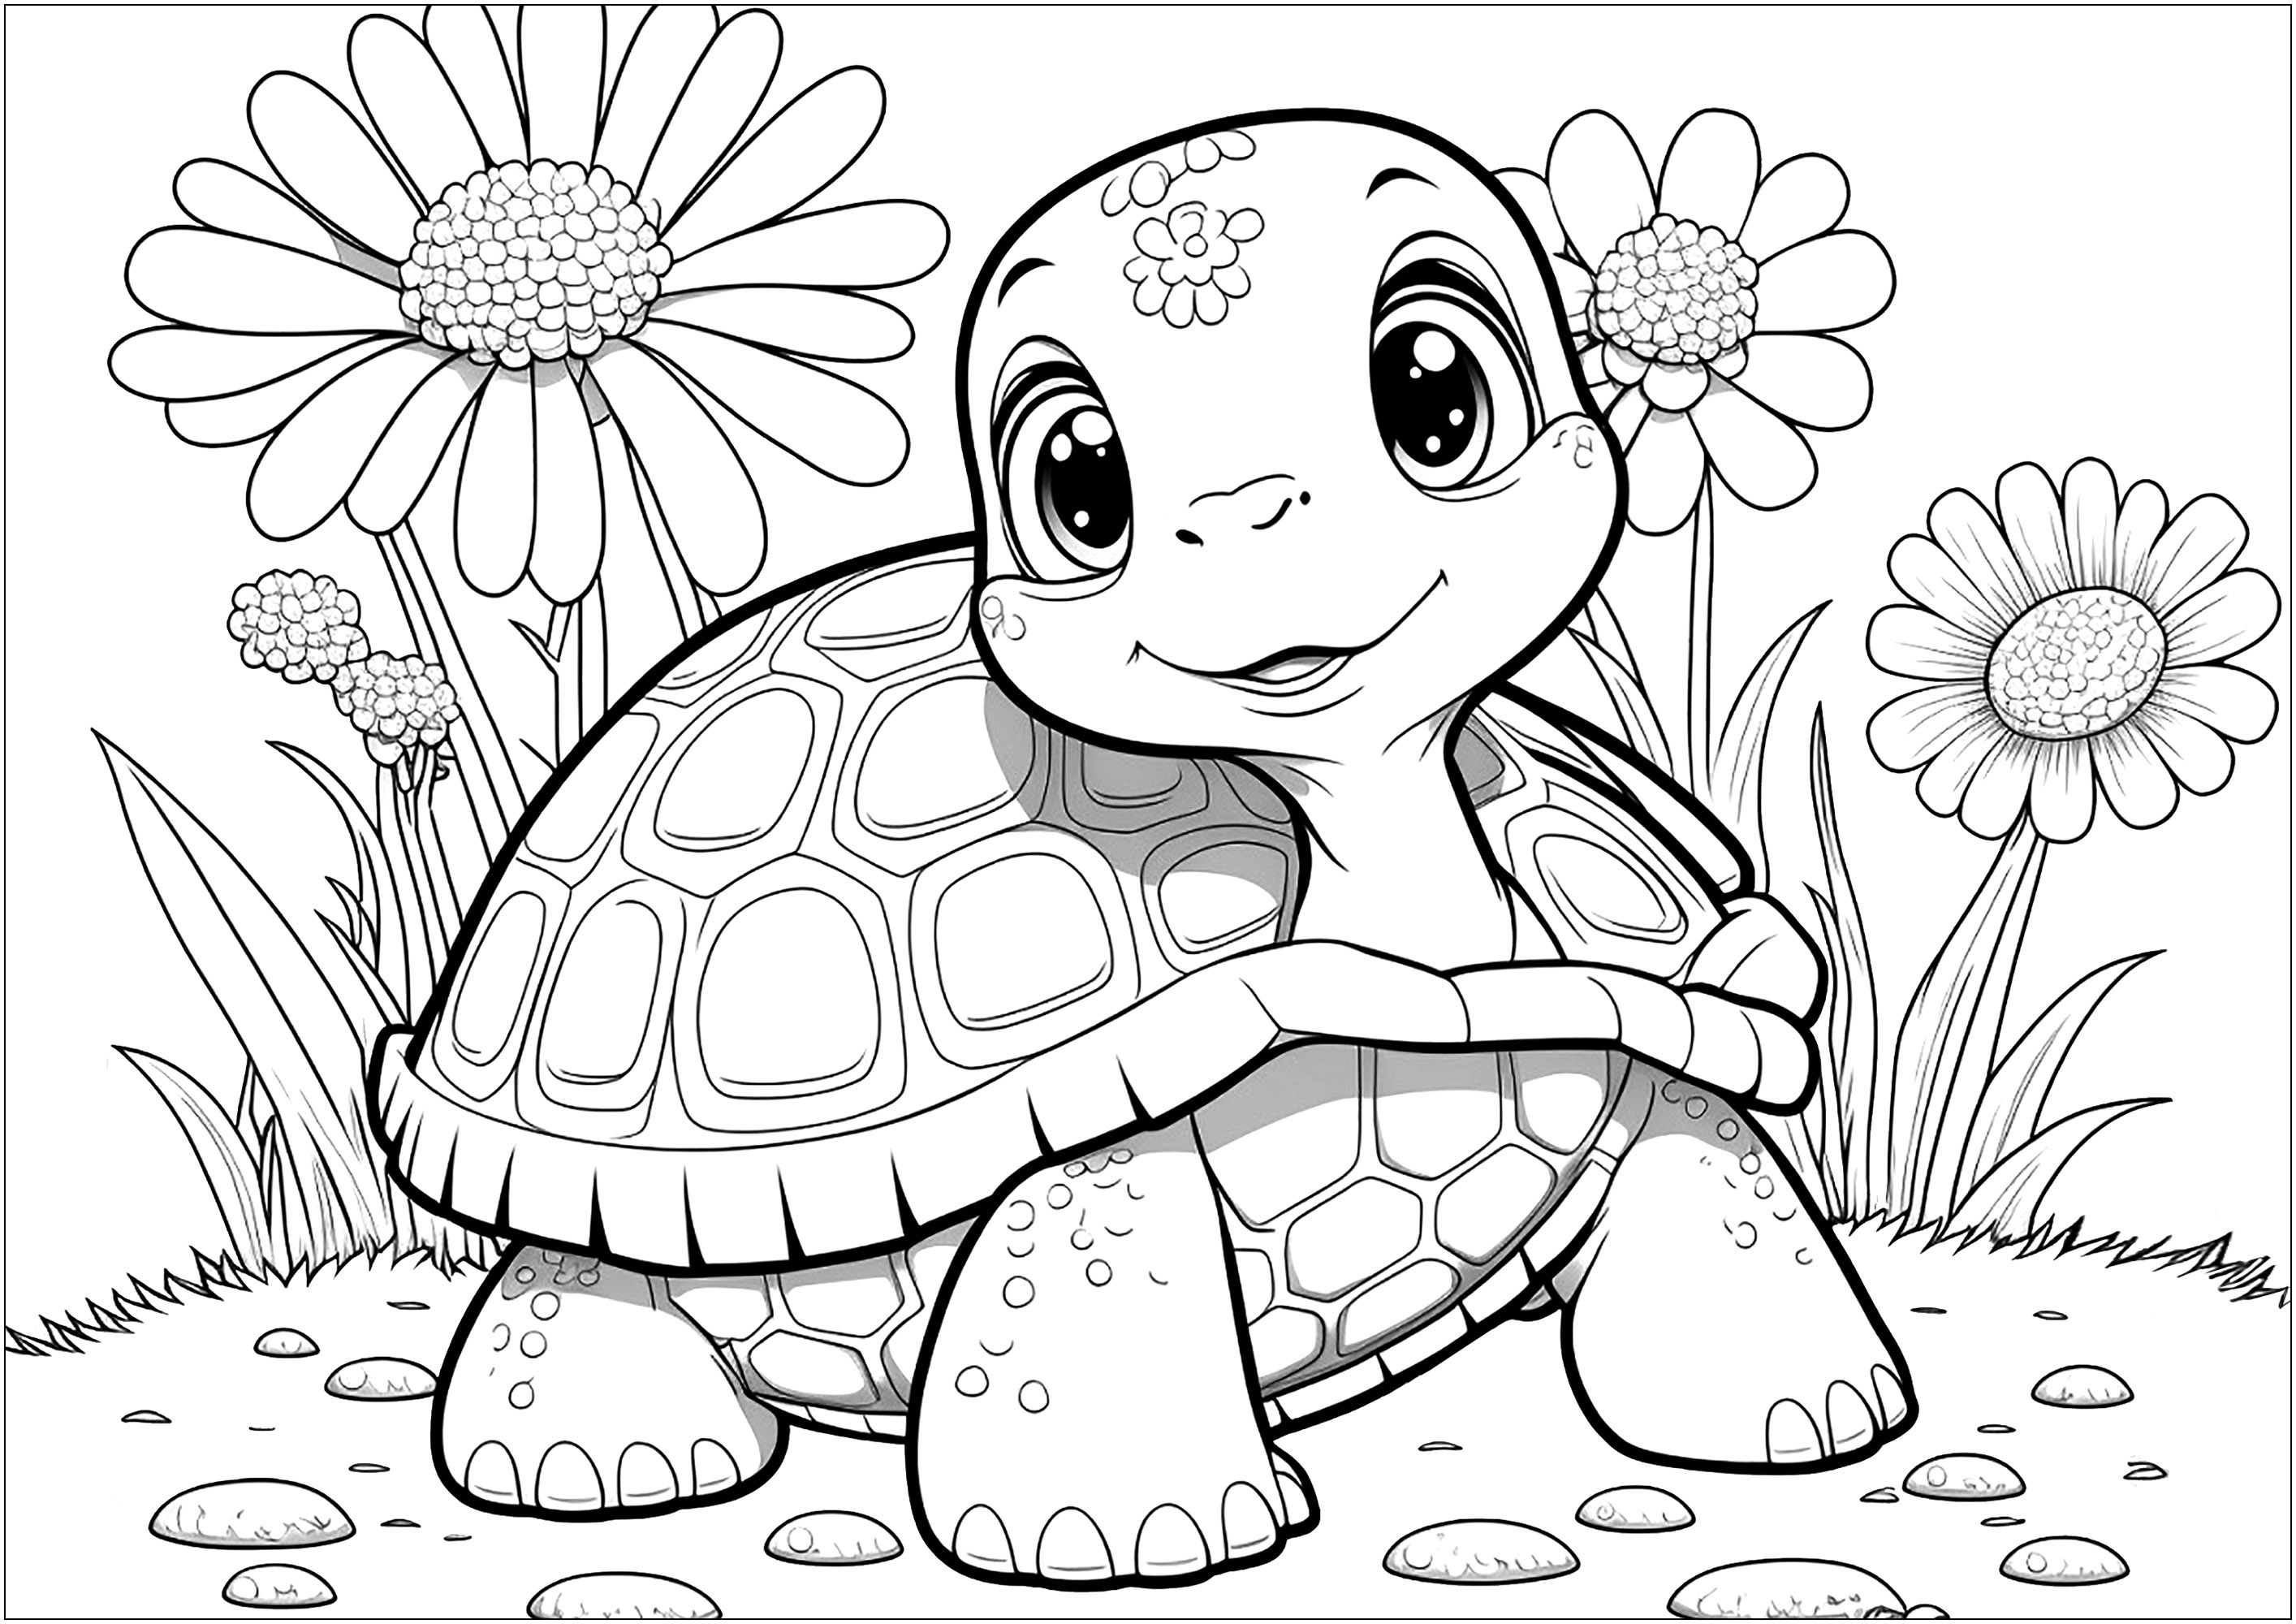 An adorable little turtle, and beautiful flowers. Only a few colors are missing